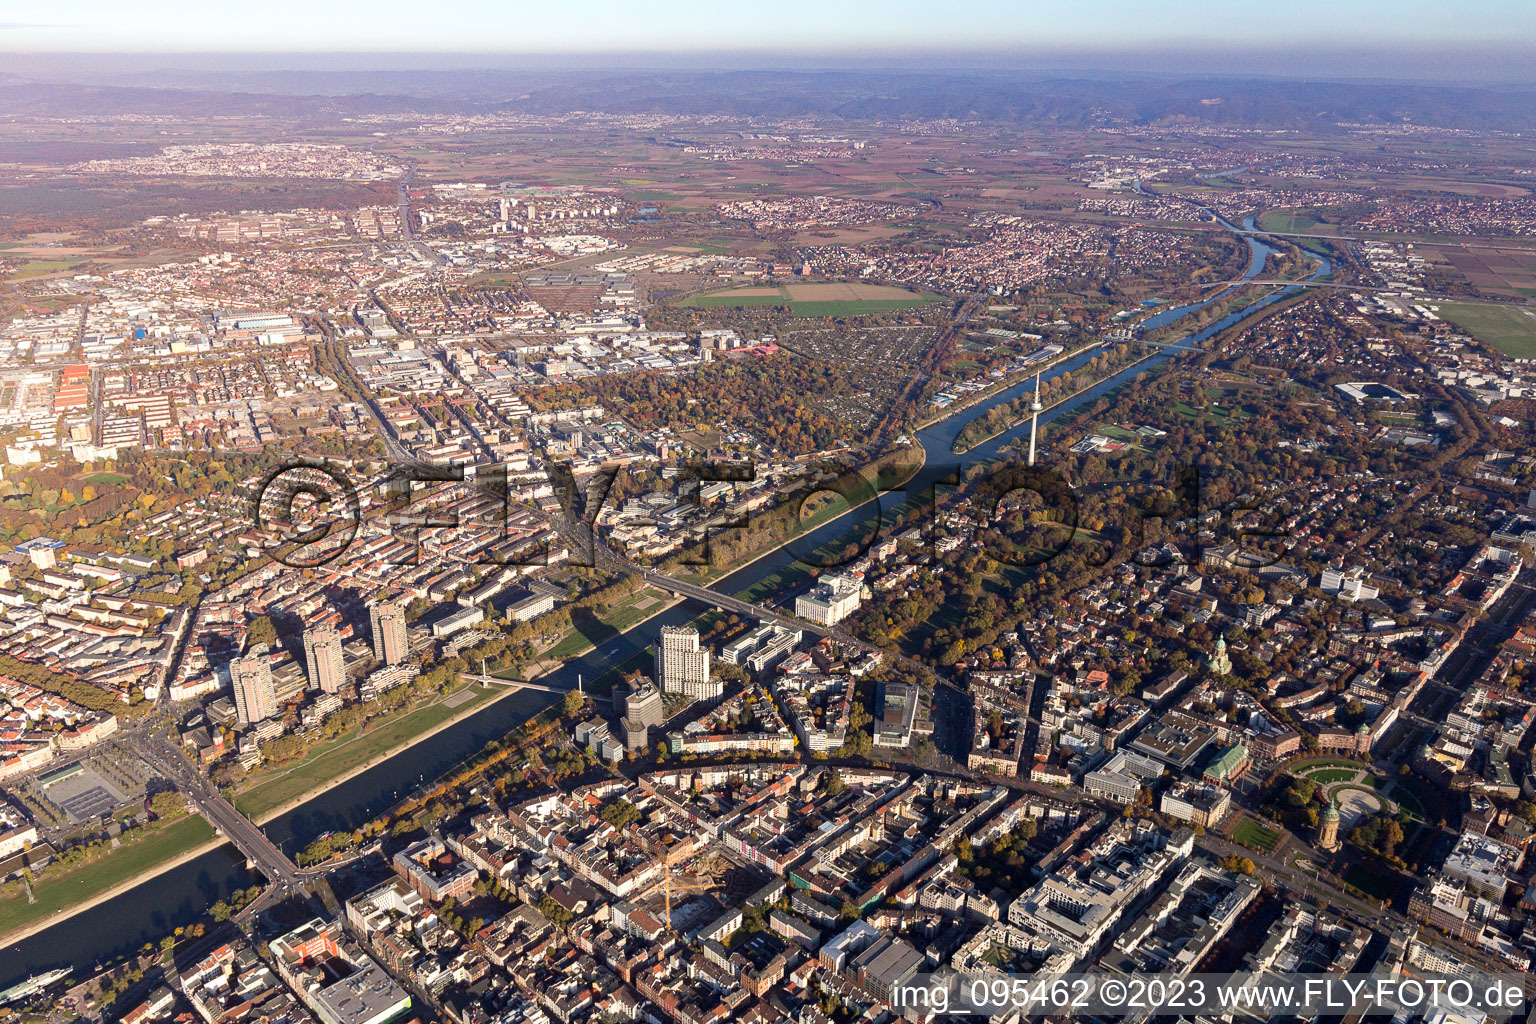 Aerial view of Neckar bridges in the district Oststadt in Mannheim in the state Baden-Wuerttemberg, Germany